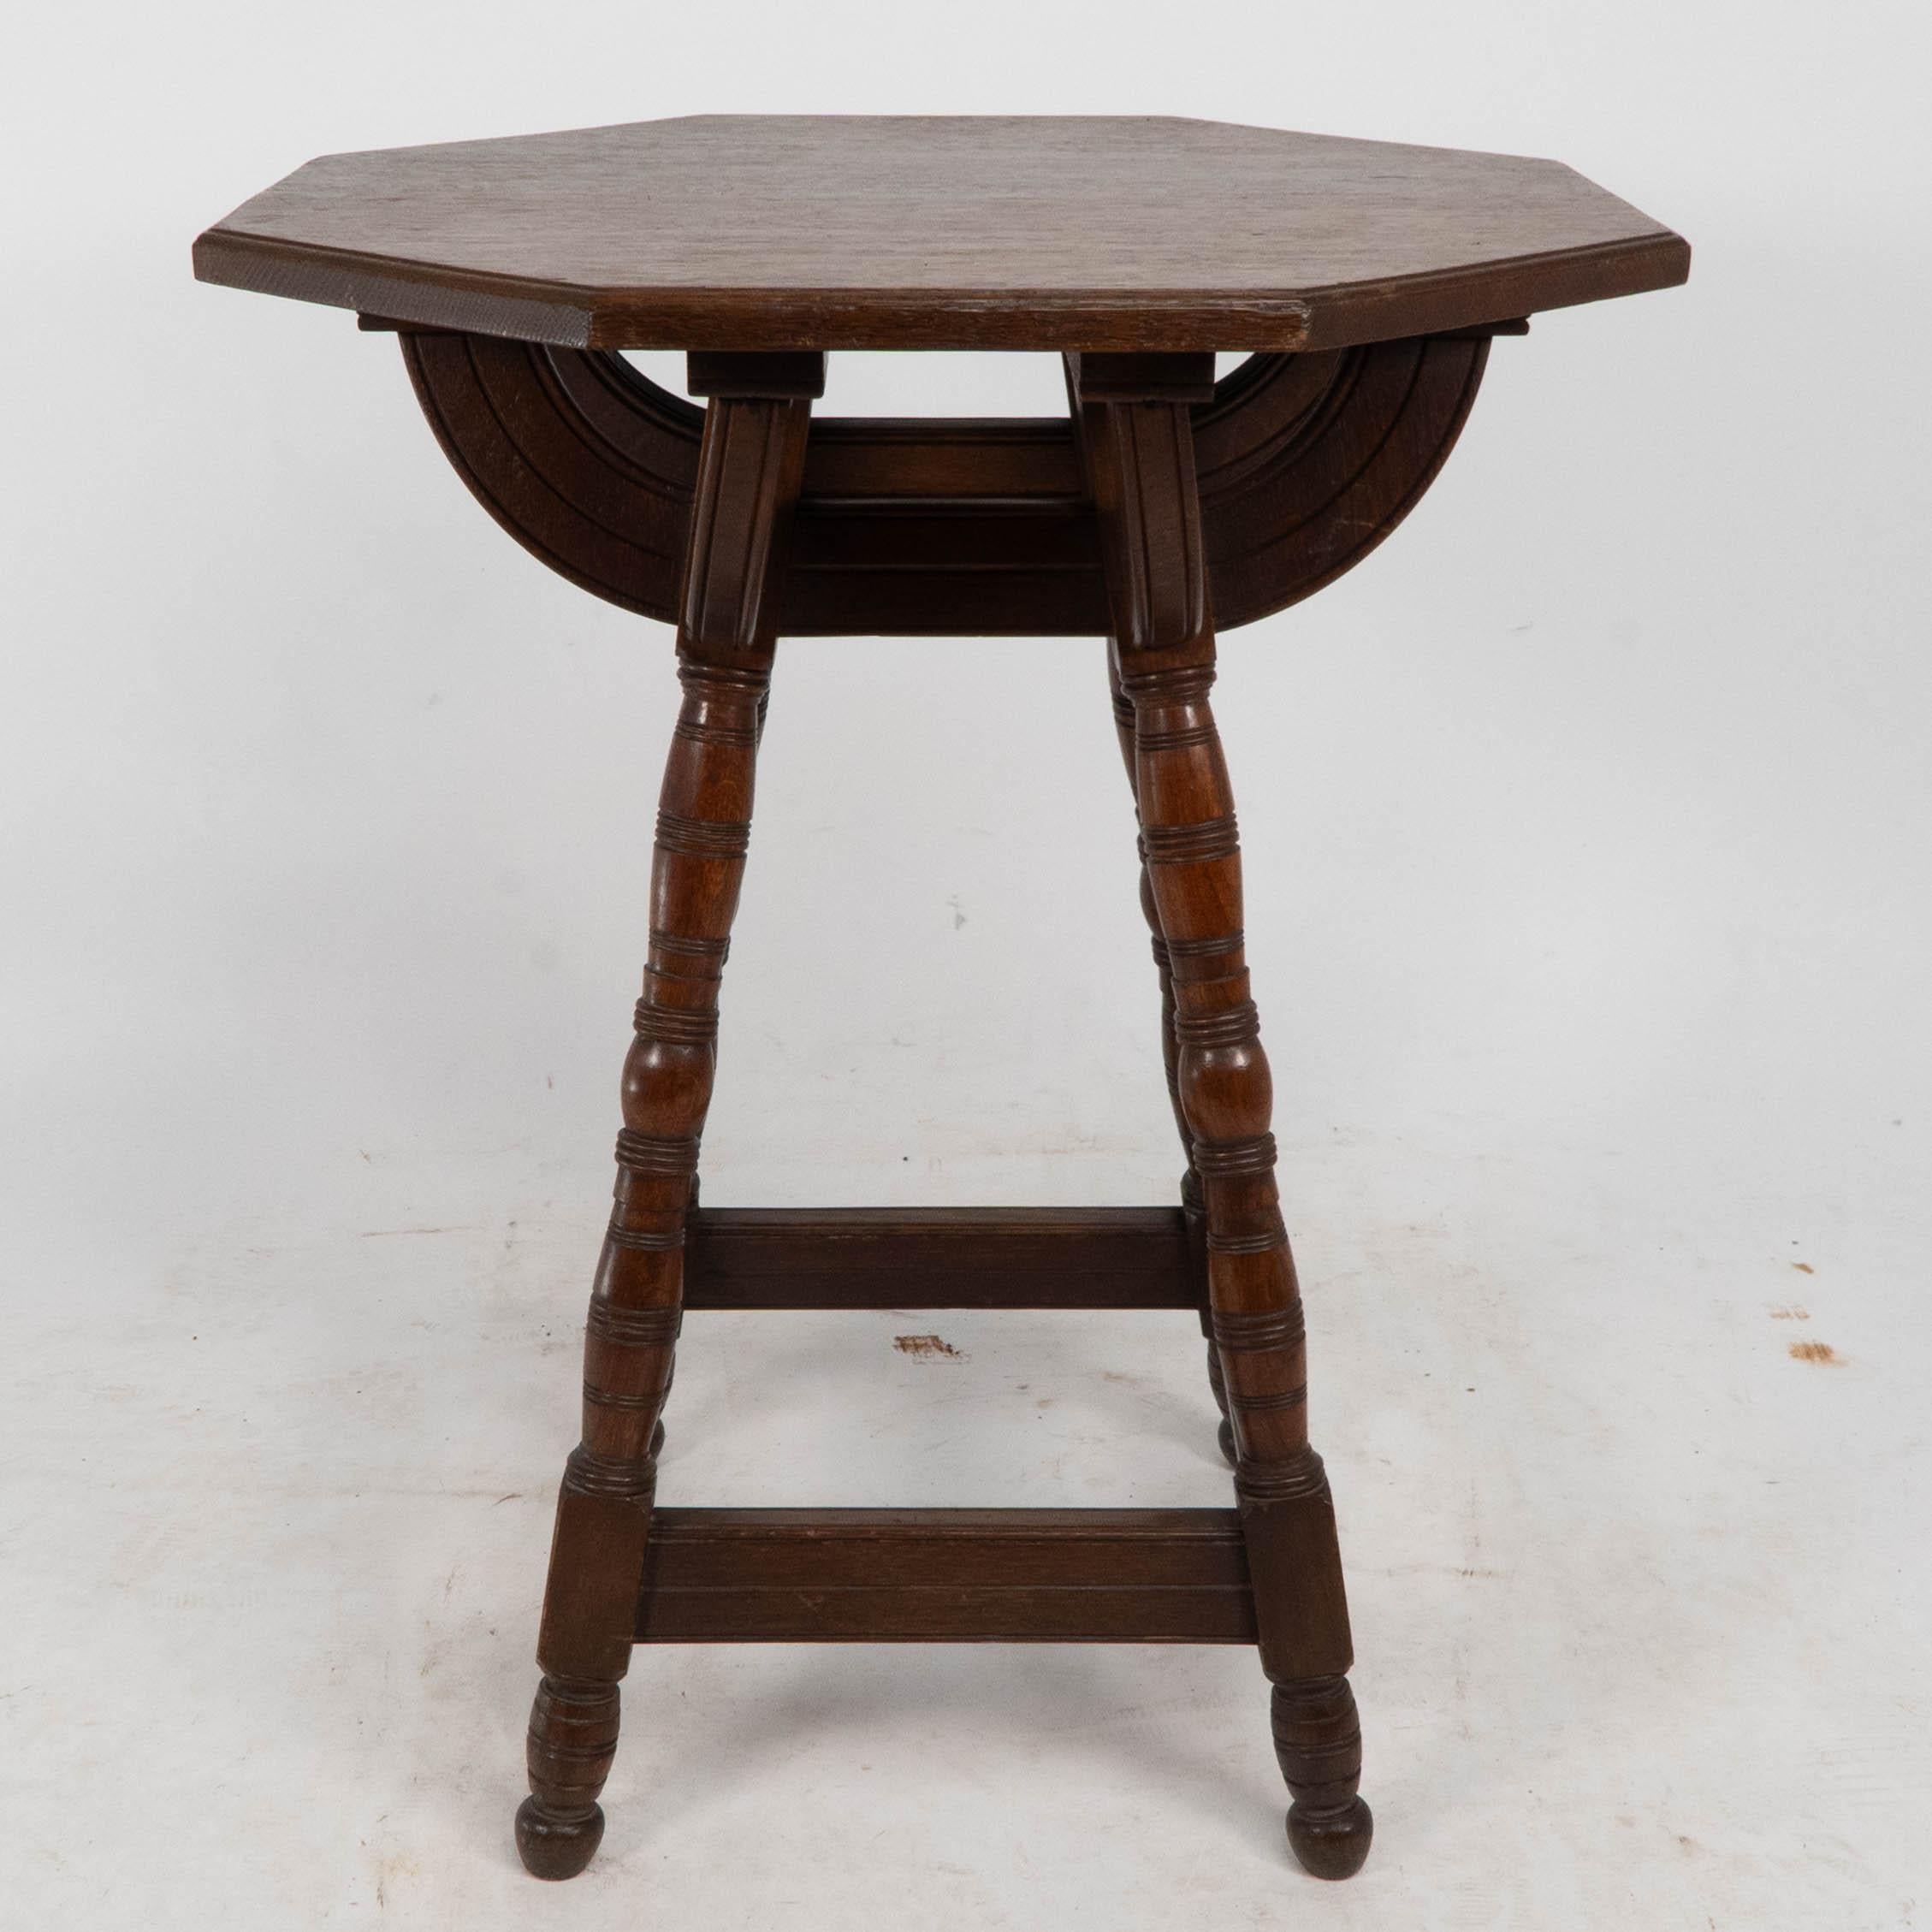 Collier and Plucknett. A rare Gothic Revival oak side table. A very accomplished solid architectural design which has a powerful look, with fine turned details and beautifully made.
